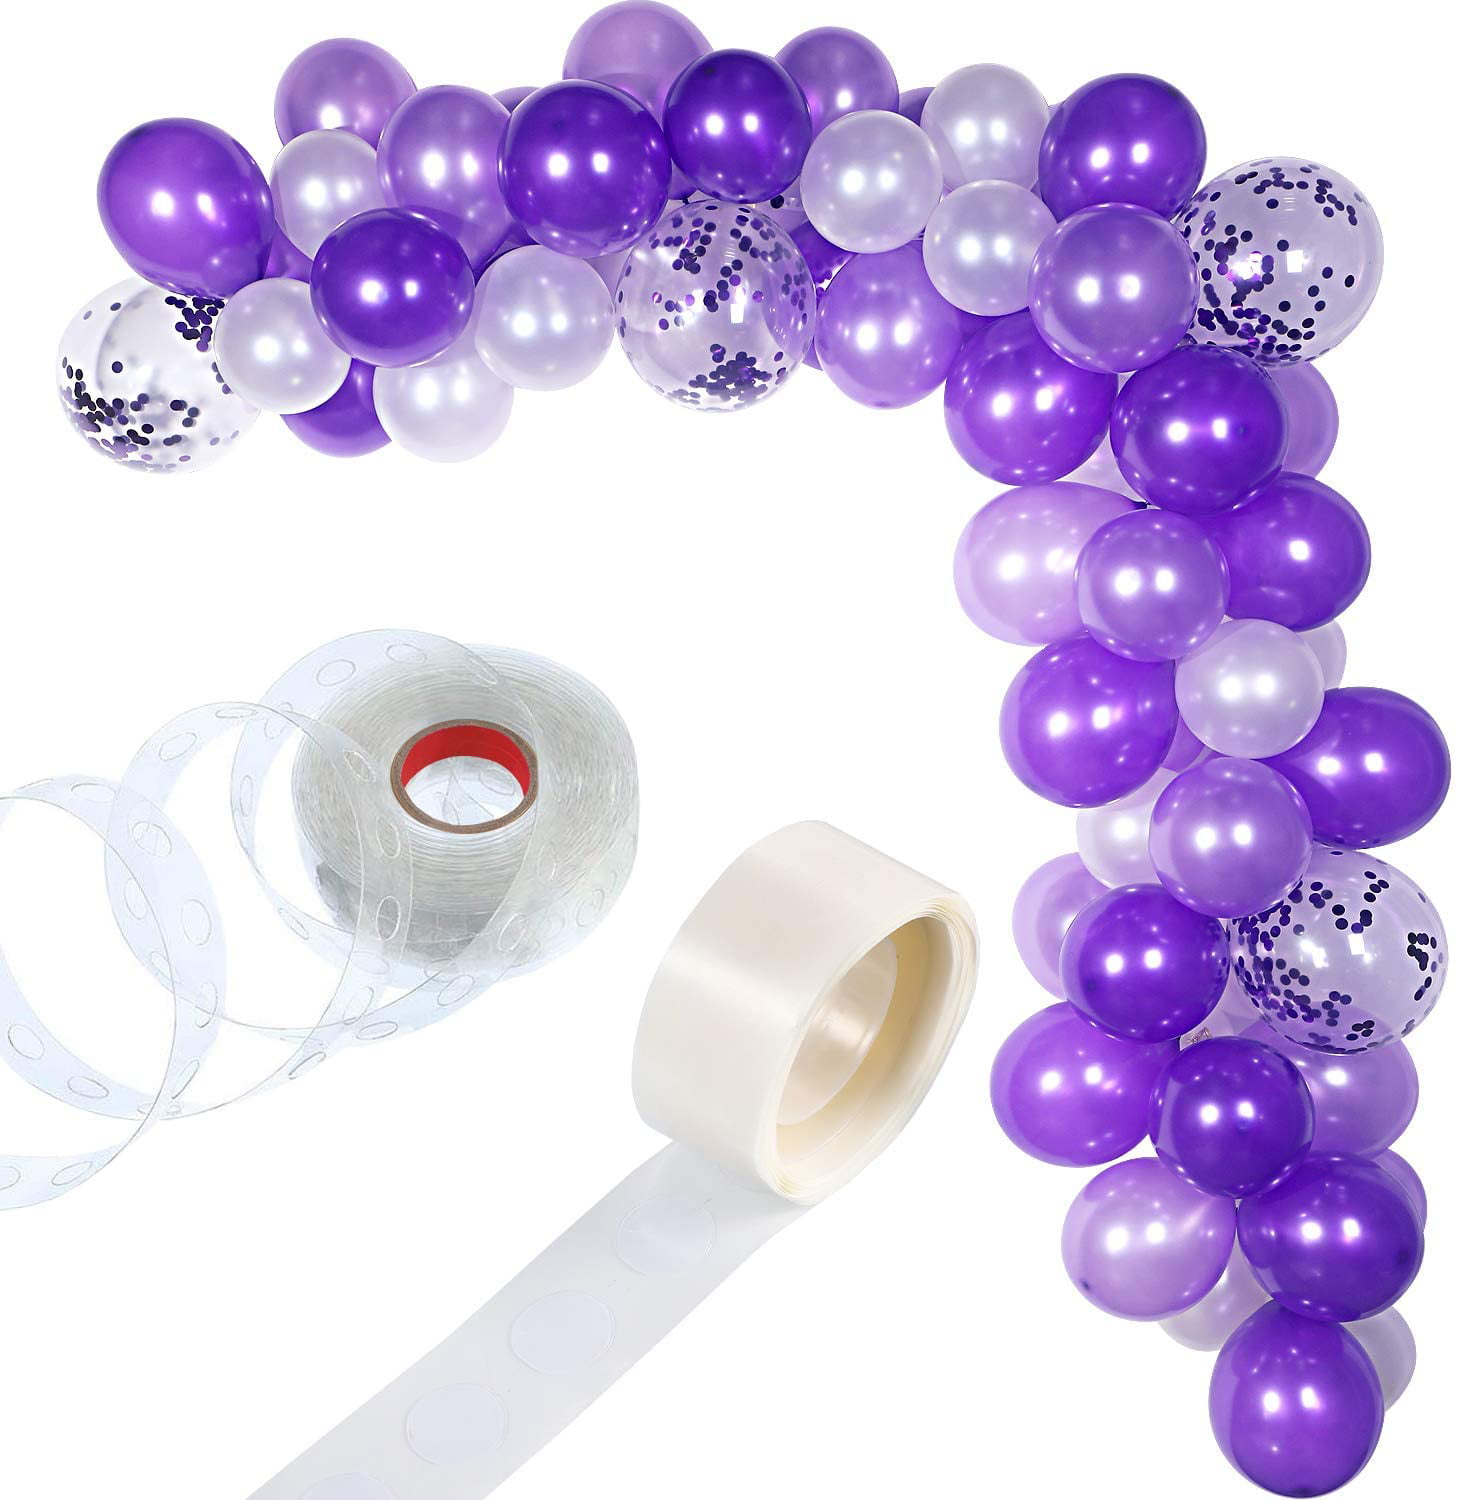 Details about   Balloon Decorating Strip Arch Garland Birthday Party Wedding Christmas Decor 5m 